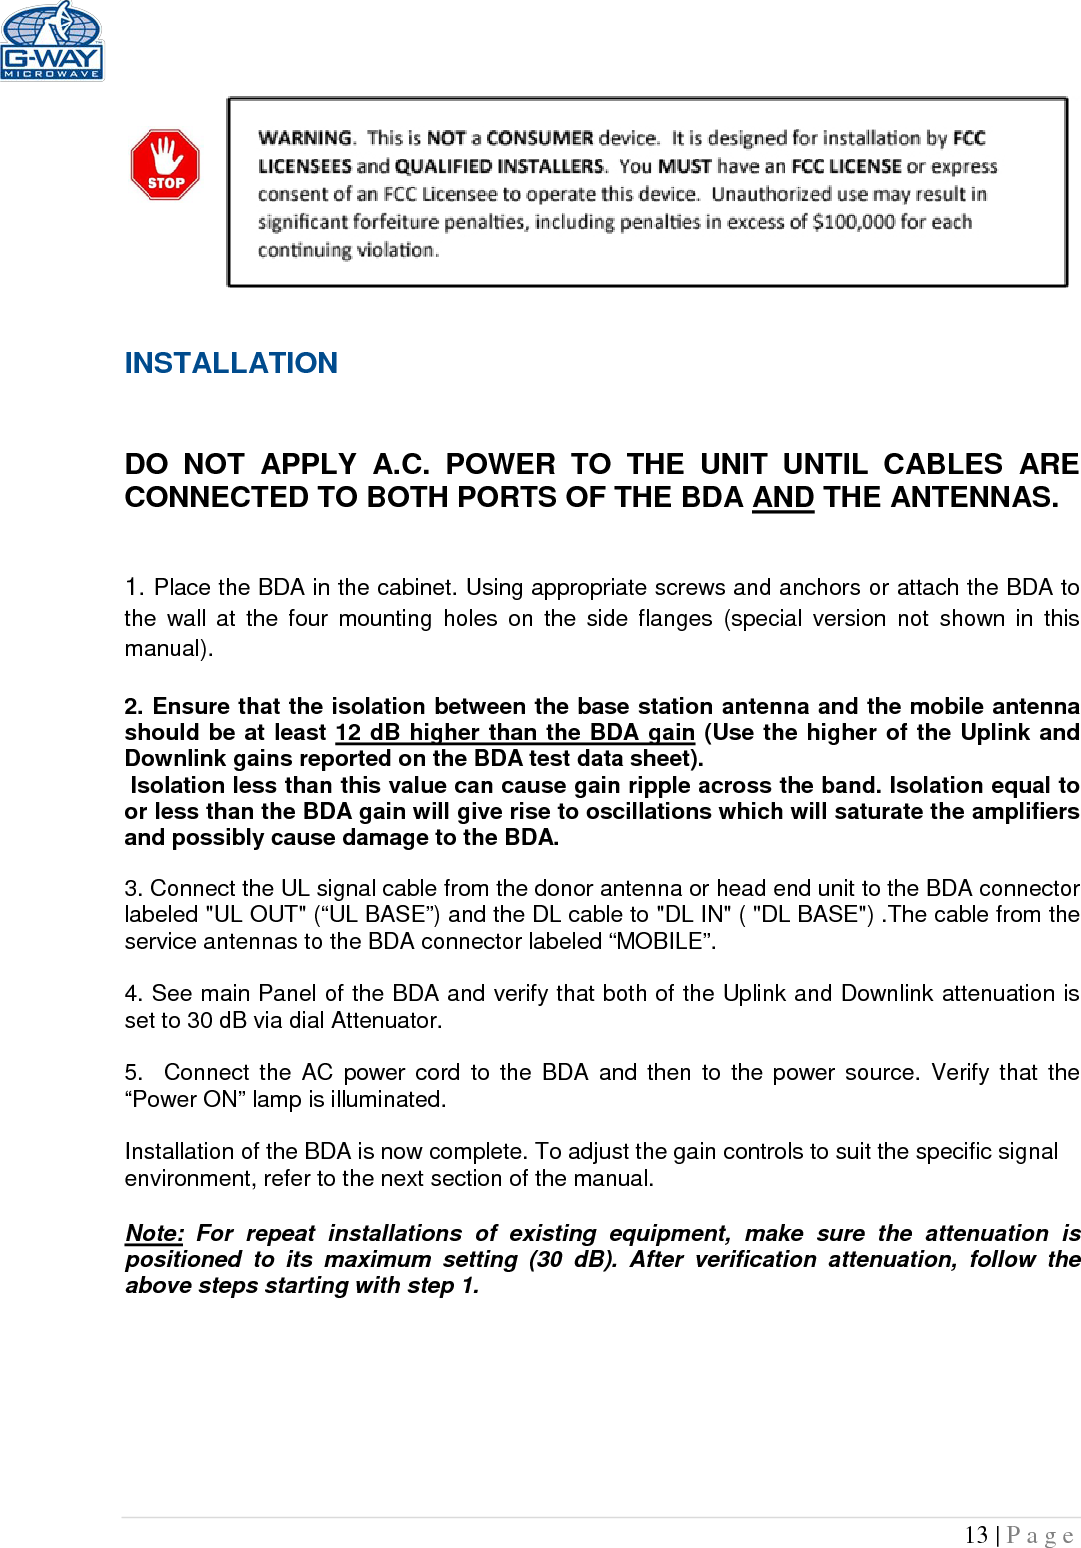   13 | Page   INSTALLATION   DO NOT APPLY A.C. POWER TO THE UNIT UNTIL CABLES ARE CONNECTED TO BOTH PORTS OF THE BDA AND THE ANTENNAS.    1. Place the BDA in the cabinet. Using appropriate screws and anchors or attach the BDA to the wall at the four mounting holes on the side flanges  (special version not shown in this manual).  2. Ensure that the isolation between the base station antenna and the mobile antenna should be at least 12 dB higher than the BDA gain (Use the higher of the Uplink and Downlink gains reported on the BDA test data sheet).  Isolation less than this value can cause gain ripple across the band. Isolation equal to or less than the BDA gain will give rise to oscillations which will saturate the amplifiers and possibly cause damage to the BDA.   3. Connect the UL signal cable from the donor antenna or head end unit to the BDA connector labeled &quot;UL OUT&quot; (“UL BASE”) and the DL cable to &quot;DL IN&quot; ( &quot;DL BASE&quot;) .The cable from the service antennas to the BDA connector labeled “MOBILE”.  4. See main Panel of the BDA and verify that both of the Uplink and Downlink attenuation is set to 30 dB via dial Attenuator.    5.  Connect the AC power cord to the BDA and then to the power source. Verify that the “Power ON” lamp is illuminated.   Installation of the BDA is now complete. To adjust the gain controls to suit the specific signal environment, refer to the next section of the manual.  Note: For repeat installations of existing equipment, make sure the attenuation is positioned to its maximum setting (30 dB). After verification attenuation, follow the above steps starting with step 1.      